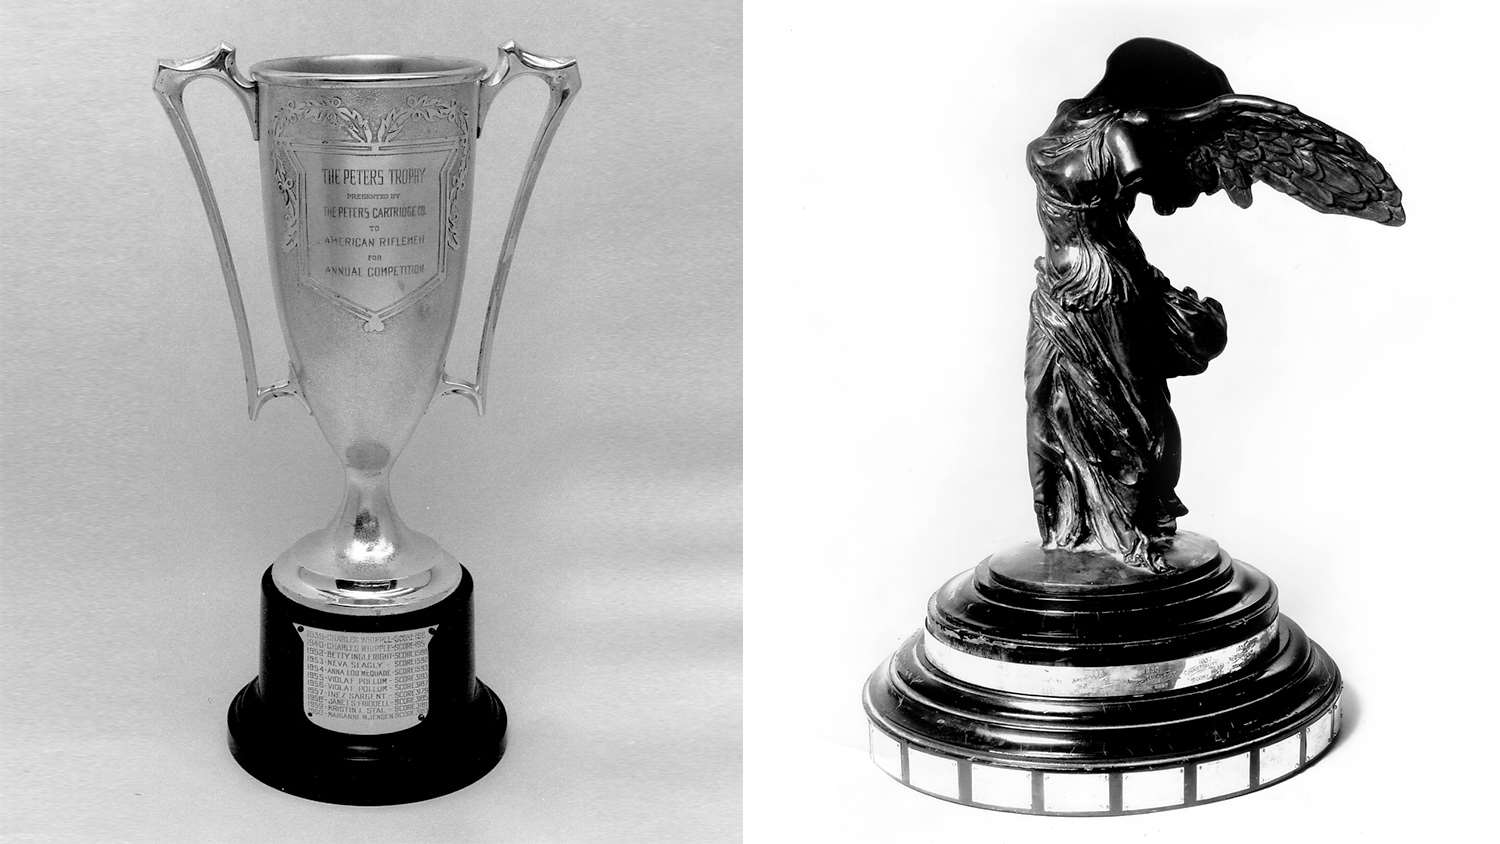 Peters Cartridge Company Trophy and the Caswell Trophy